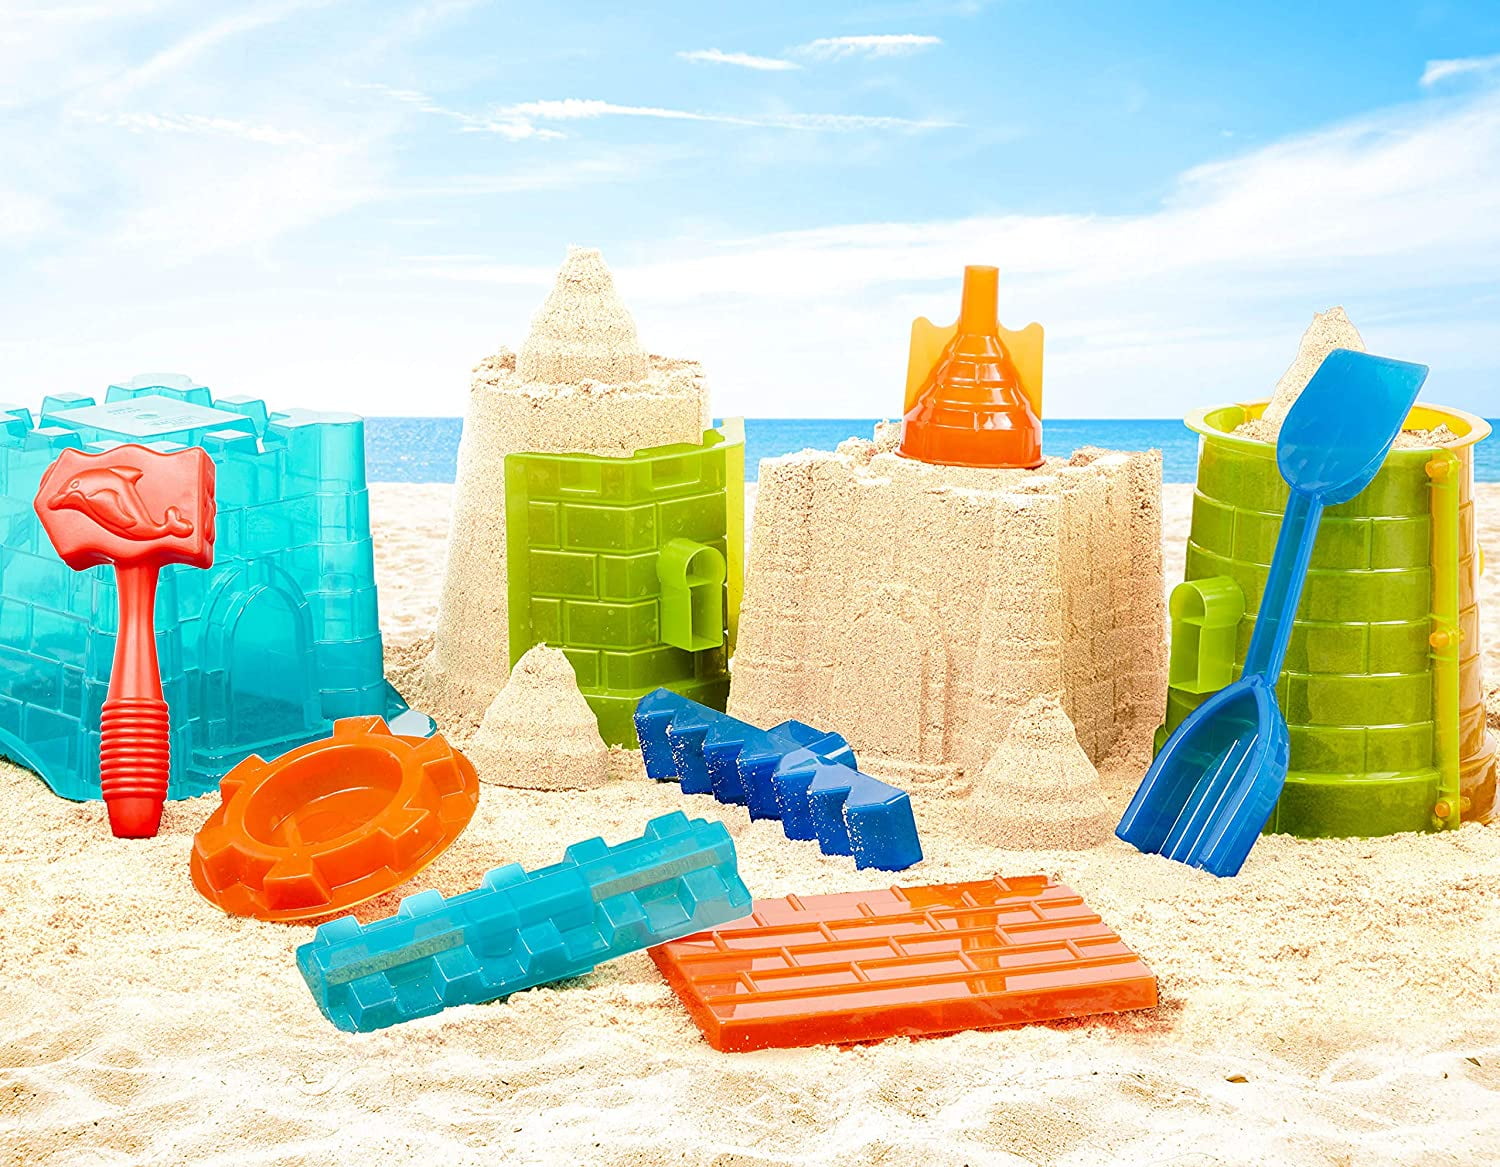 Multi Style Sand Castle Building Model Mold Beach Fun Toys For Kids*Children Toy 